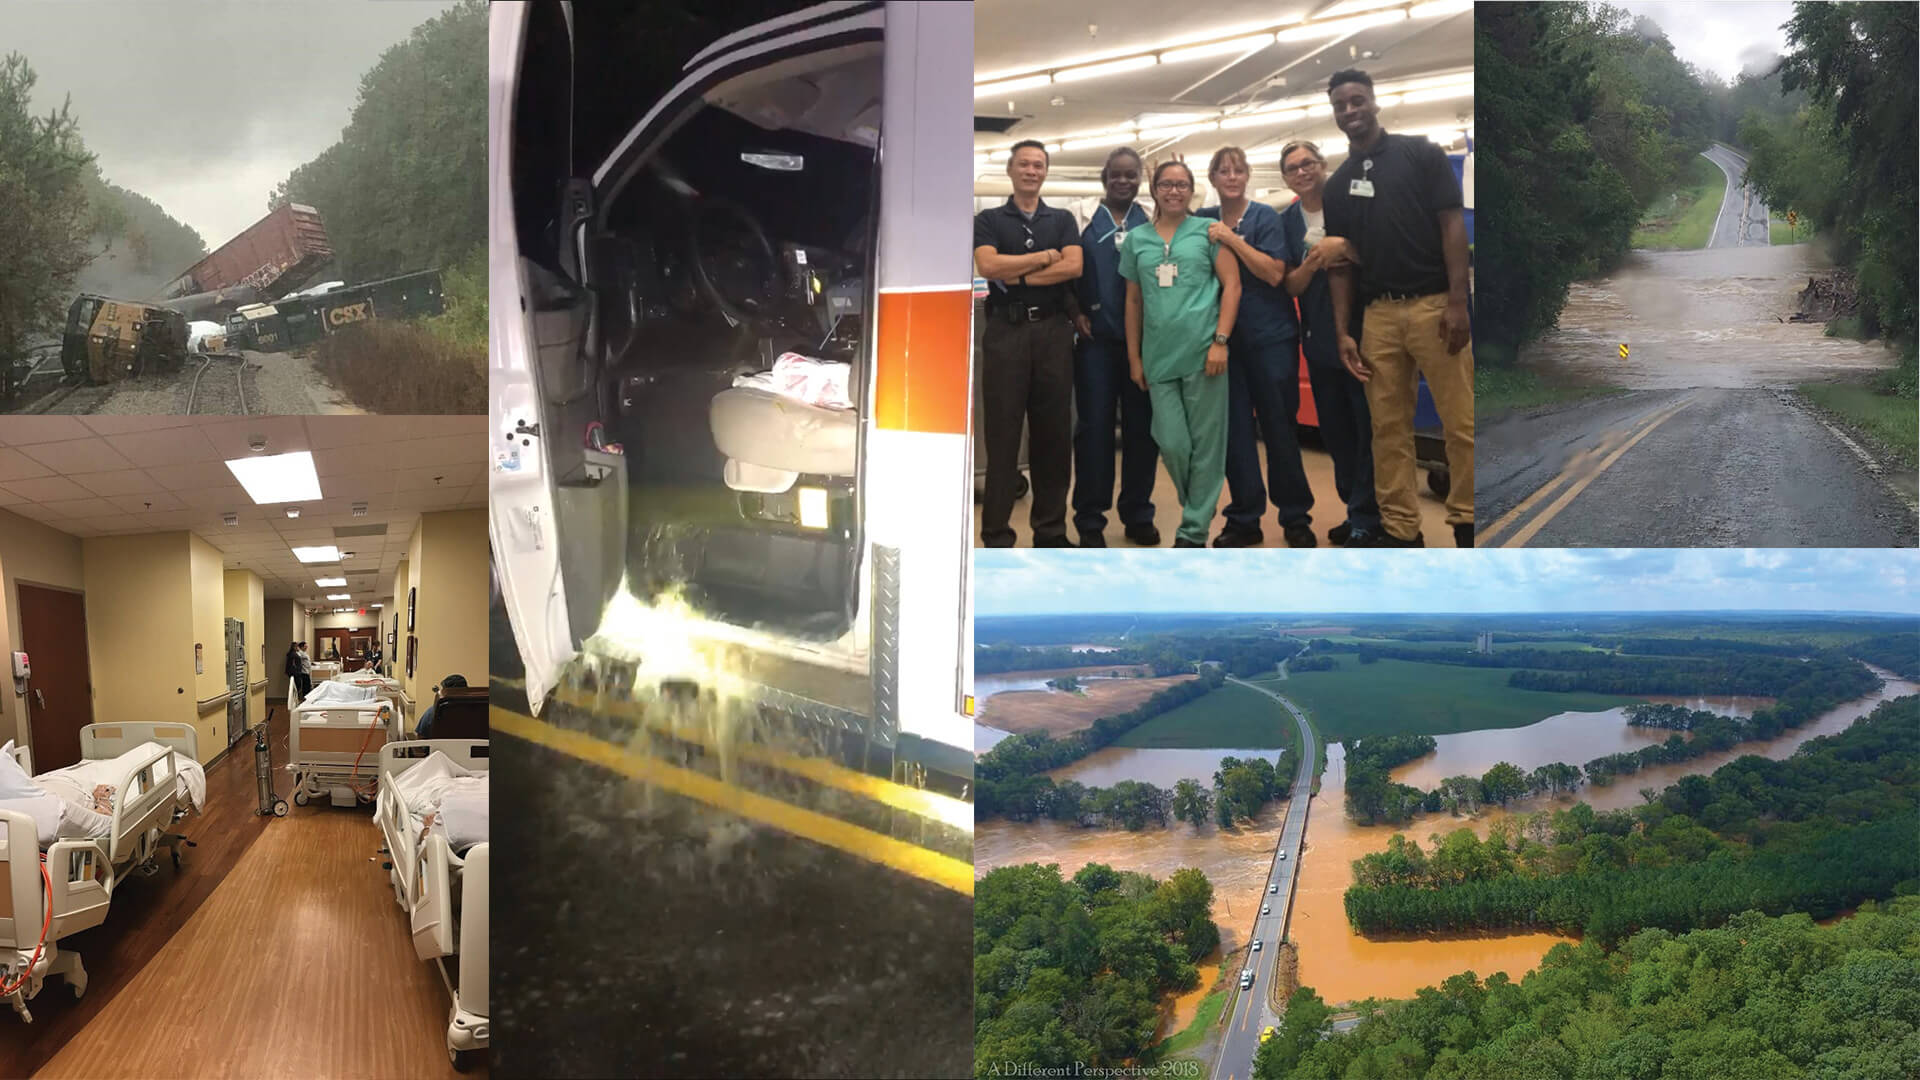 An ambulance consumed by rushing water. A train derailment. Dozens and dozens or road closings. The staffs of Carolinas HealthCare System Union and Carolinas HealthCare System Anson endured everything Hurricane Florence could throw at them. But their commitment to care for both patients, their communities and their teammates never wavered. 